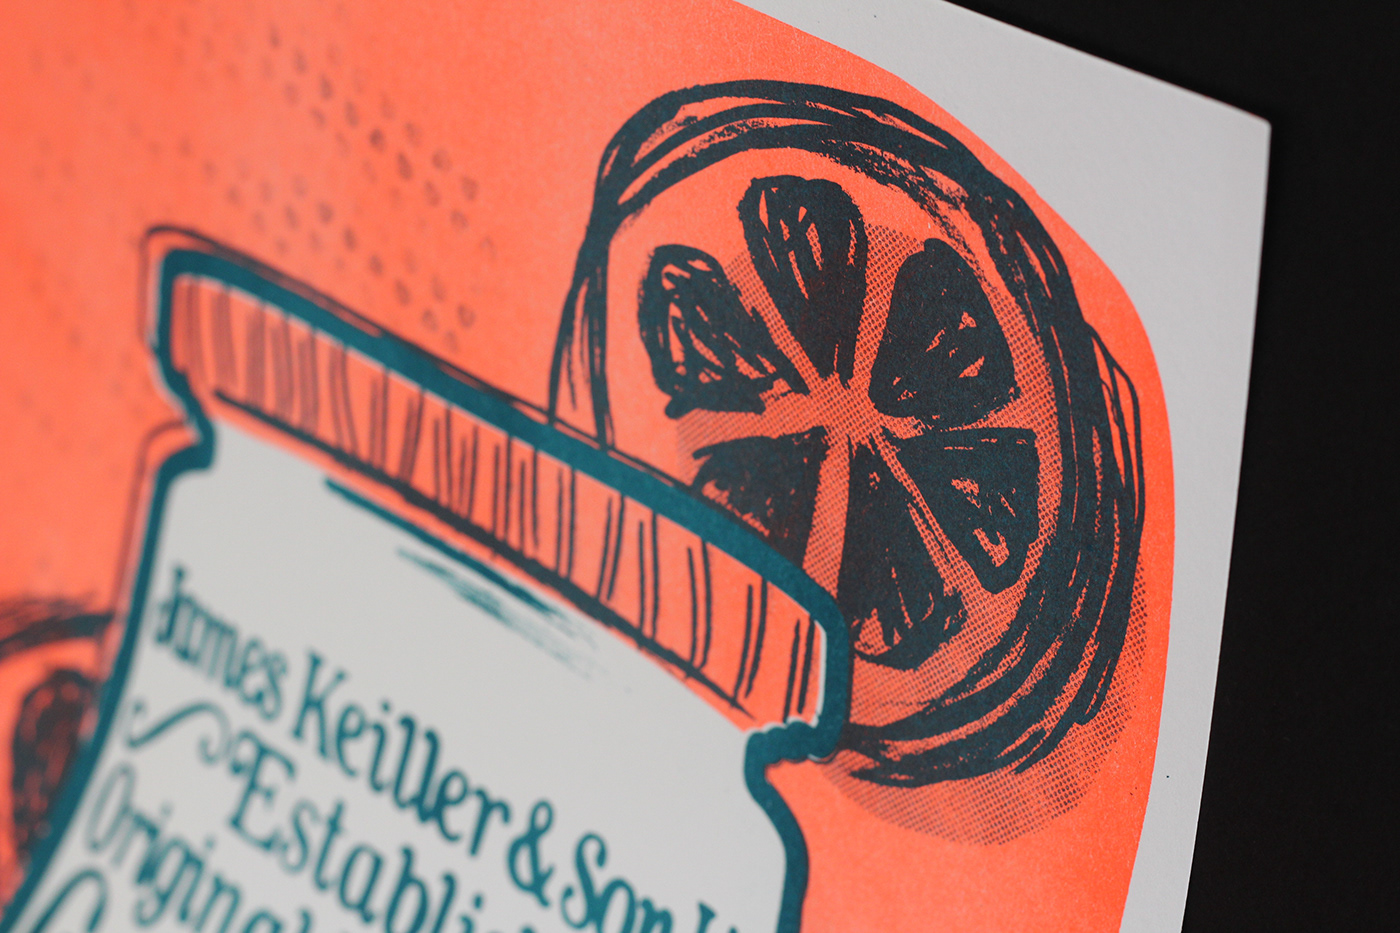 risograph dundee marmalade Riso Keiller's Marmalade Old Dundee printmaking fluorescent ink oranges scotland